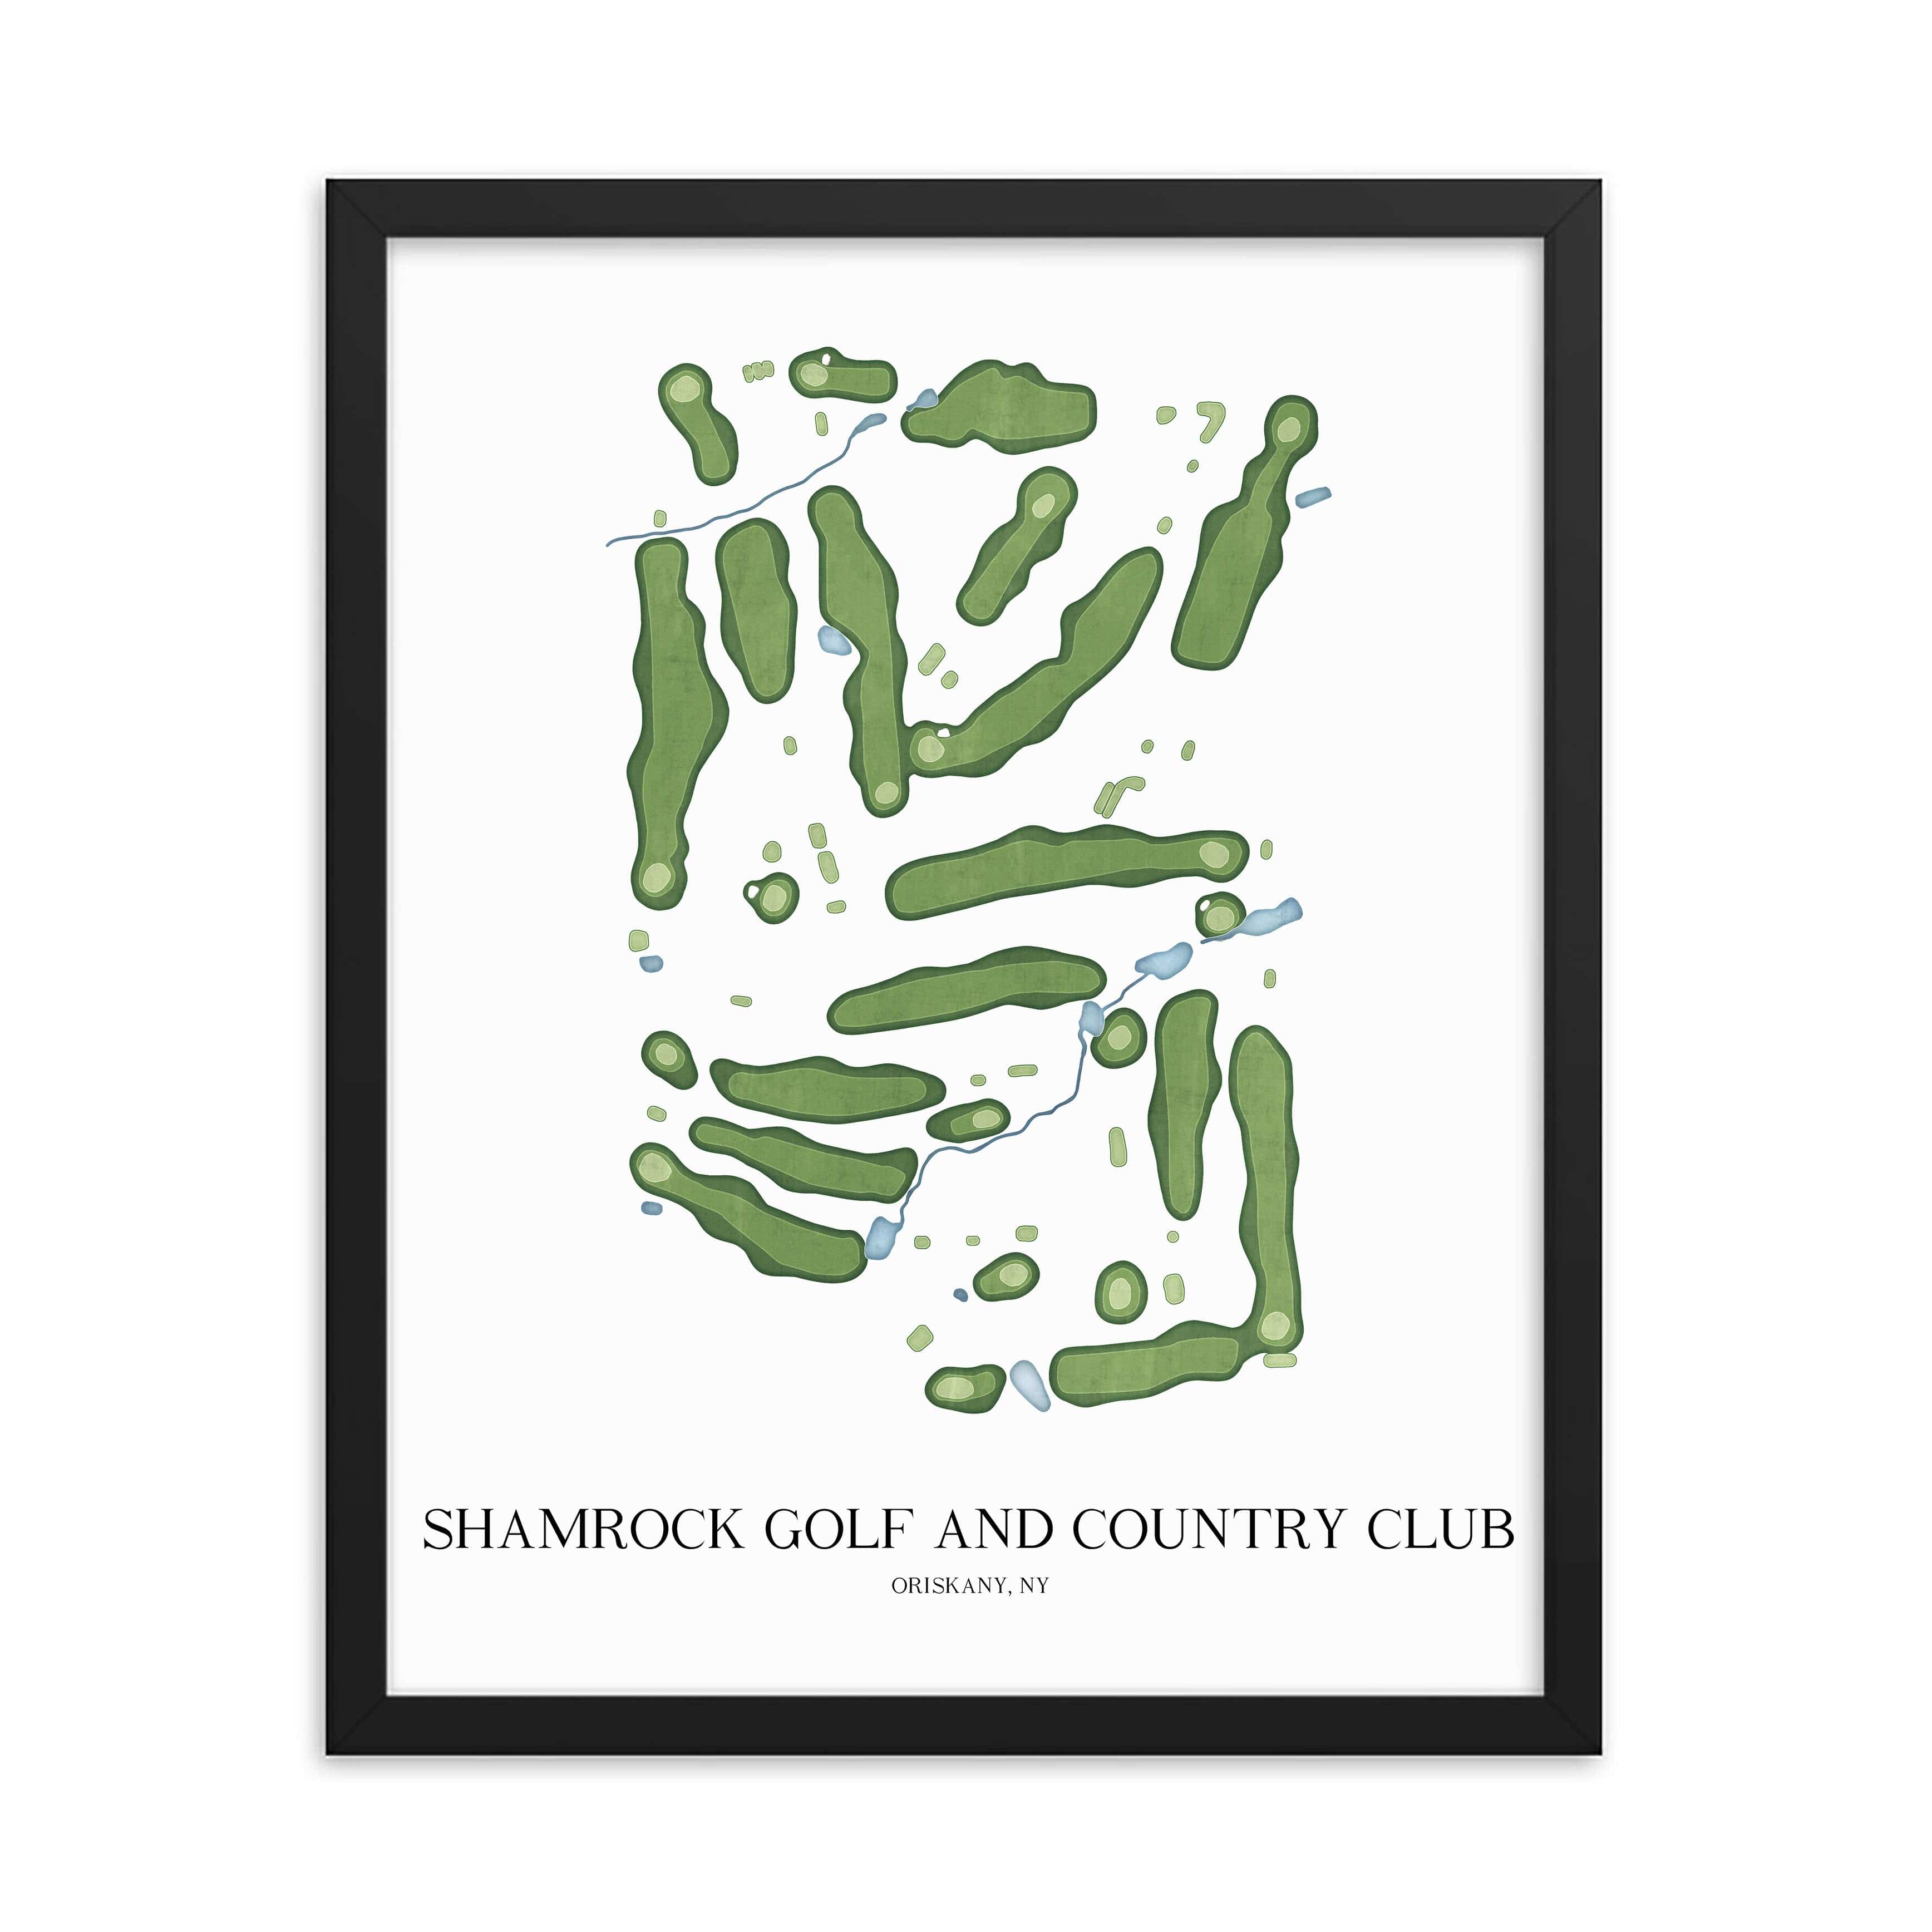 The 19th Hole Golf Shop - Golf Course Prints -  Shamrock Golf and Country Club Golf Course Map